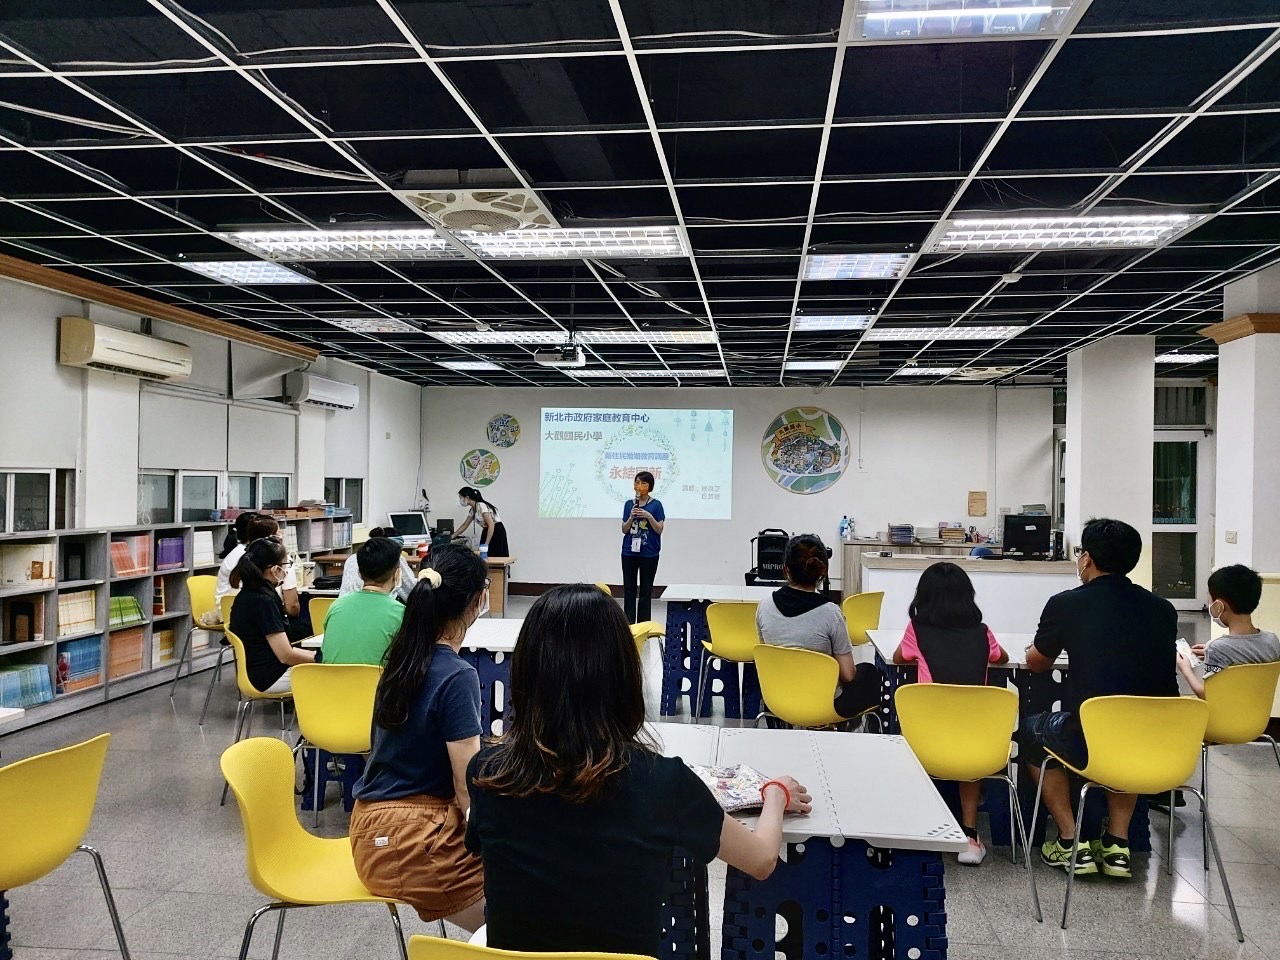 The New Taipei City Service Station of the NIA handles family education and law advocacy courses at Daguan Elementary School in Banqiao District. (Photo/Provided by New Taipei City Service Station)